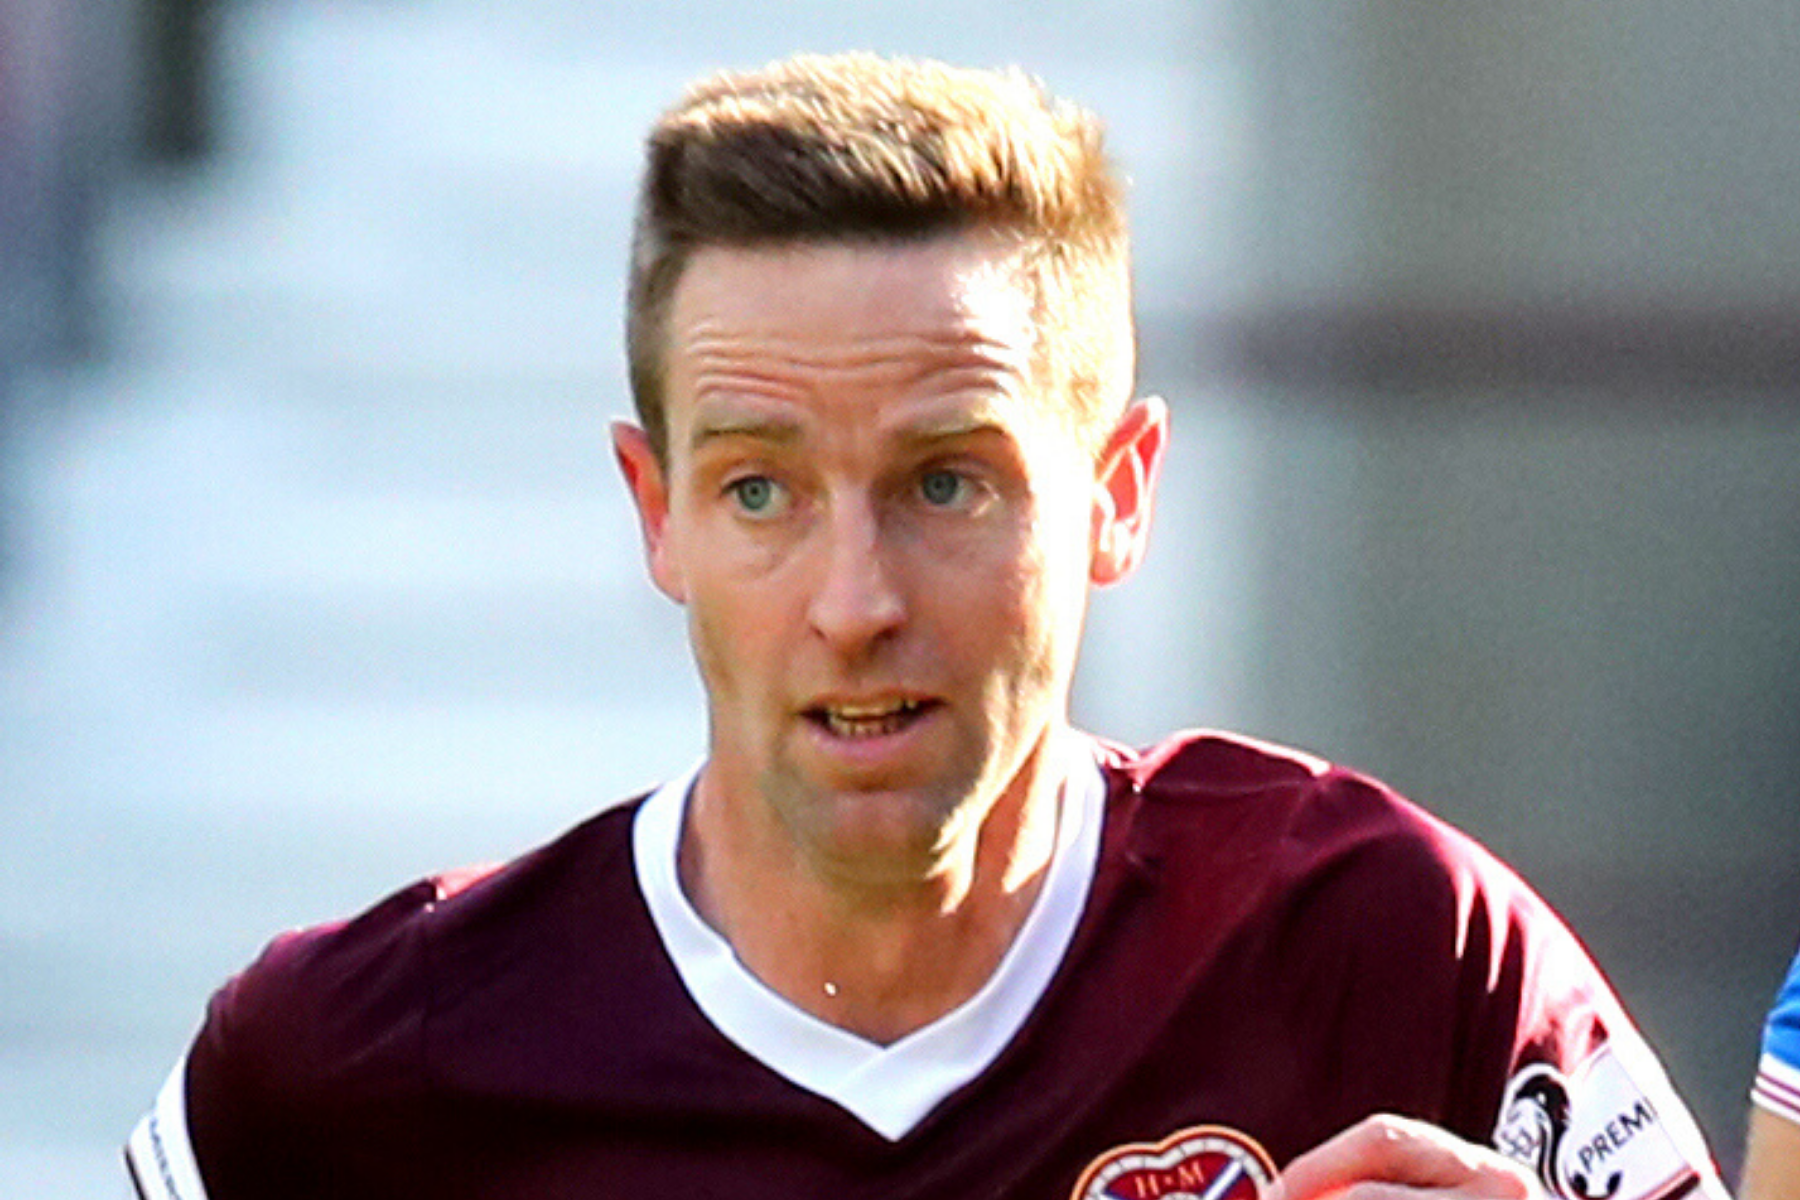 Steven MacLean on facing relegation with Hearts and promotion with Raith Rovers in same season